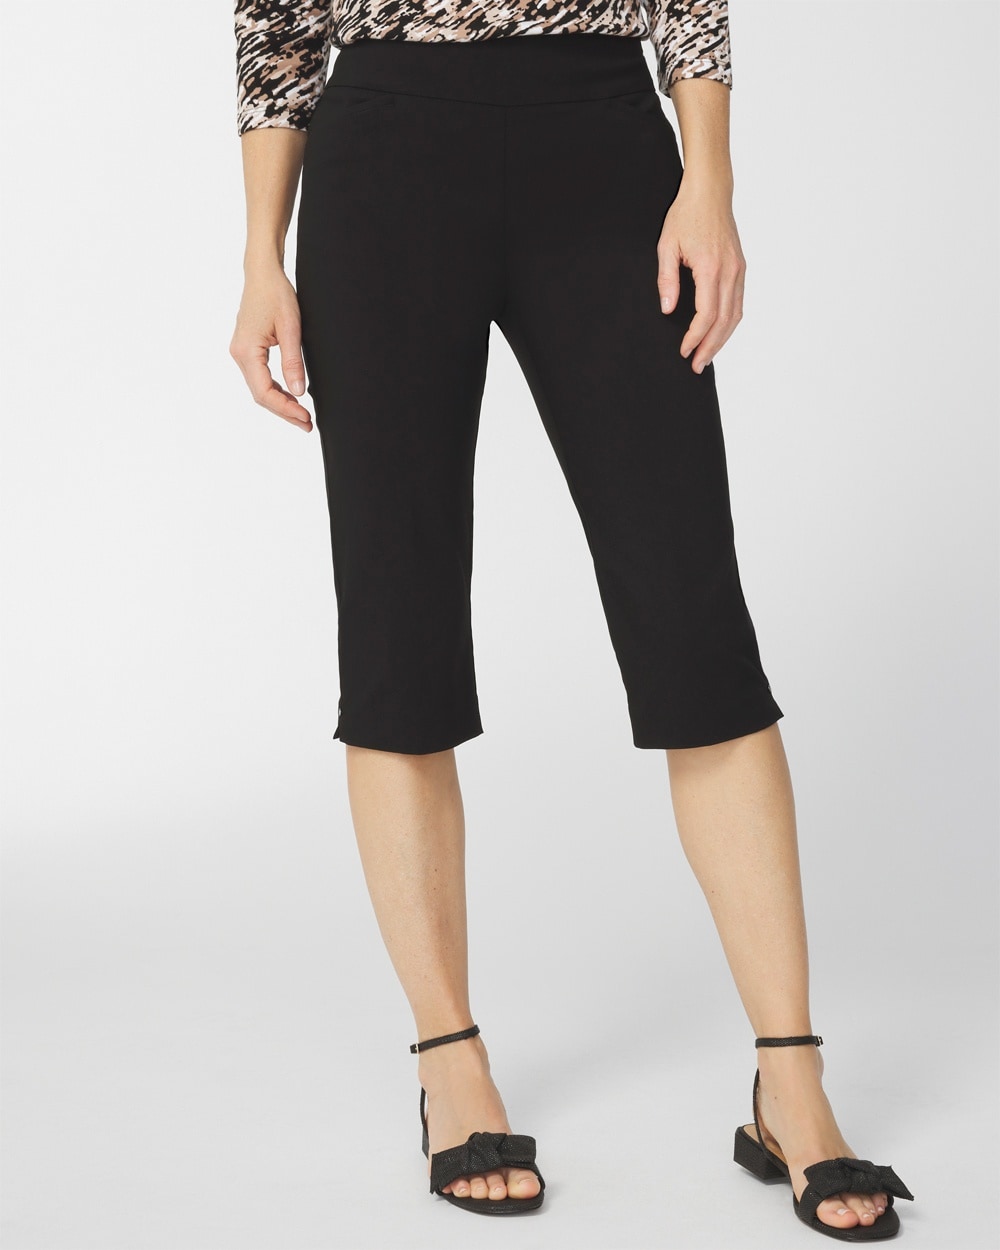 Perfect Stretch Josie Pedal Pusher Pants